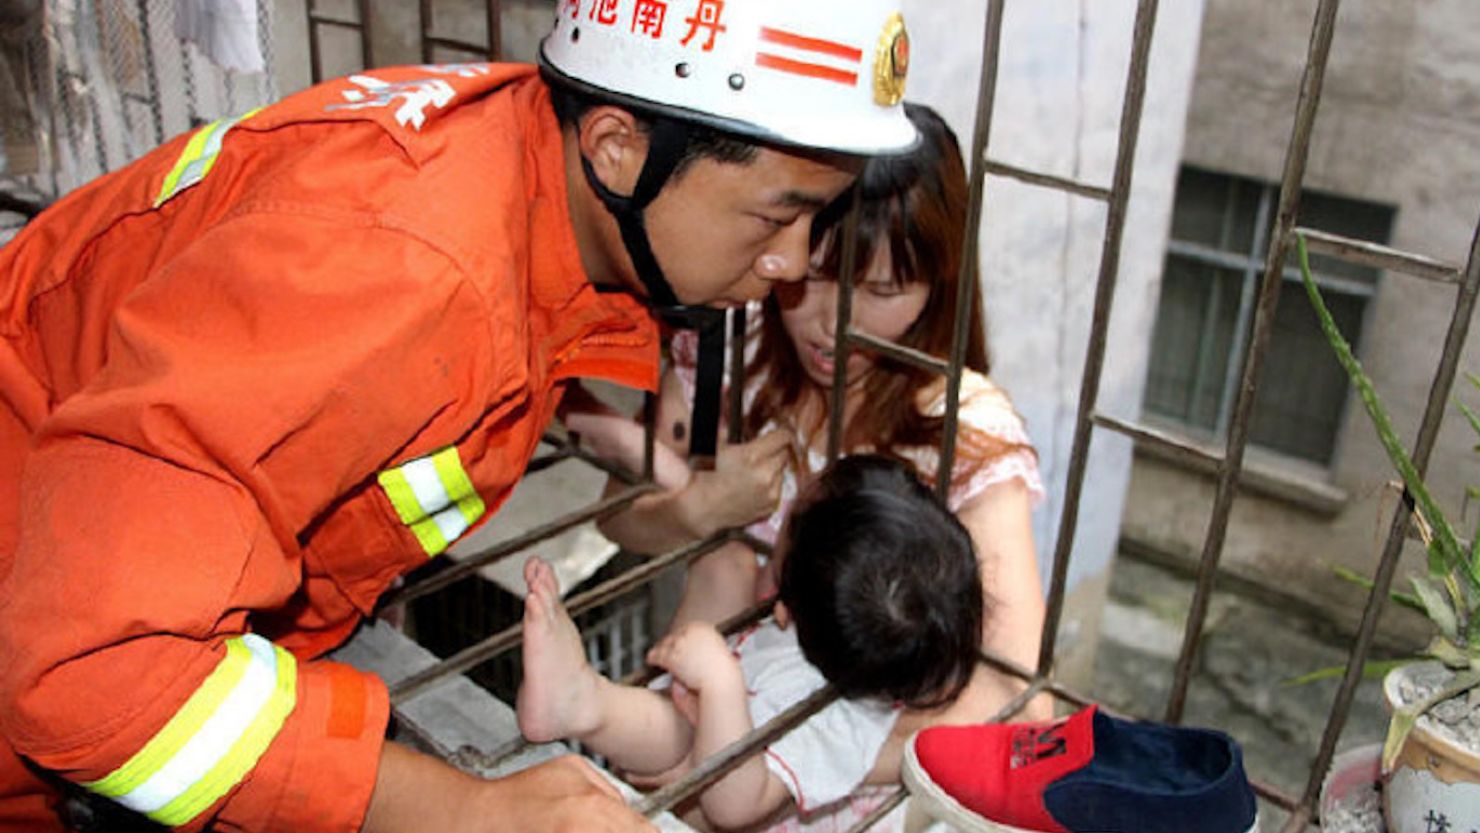 Firefighters in China rescued a three-year-old girl who fell through a gap in a second-floor balcony.